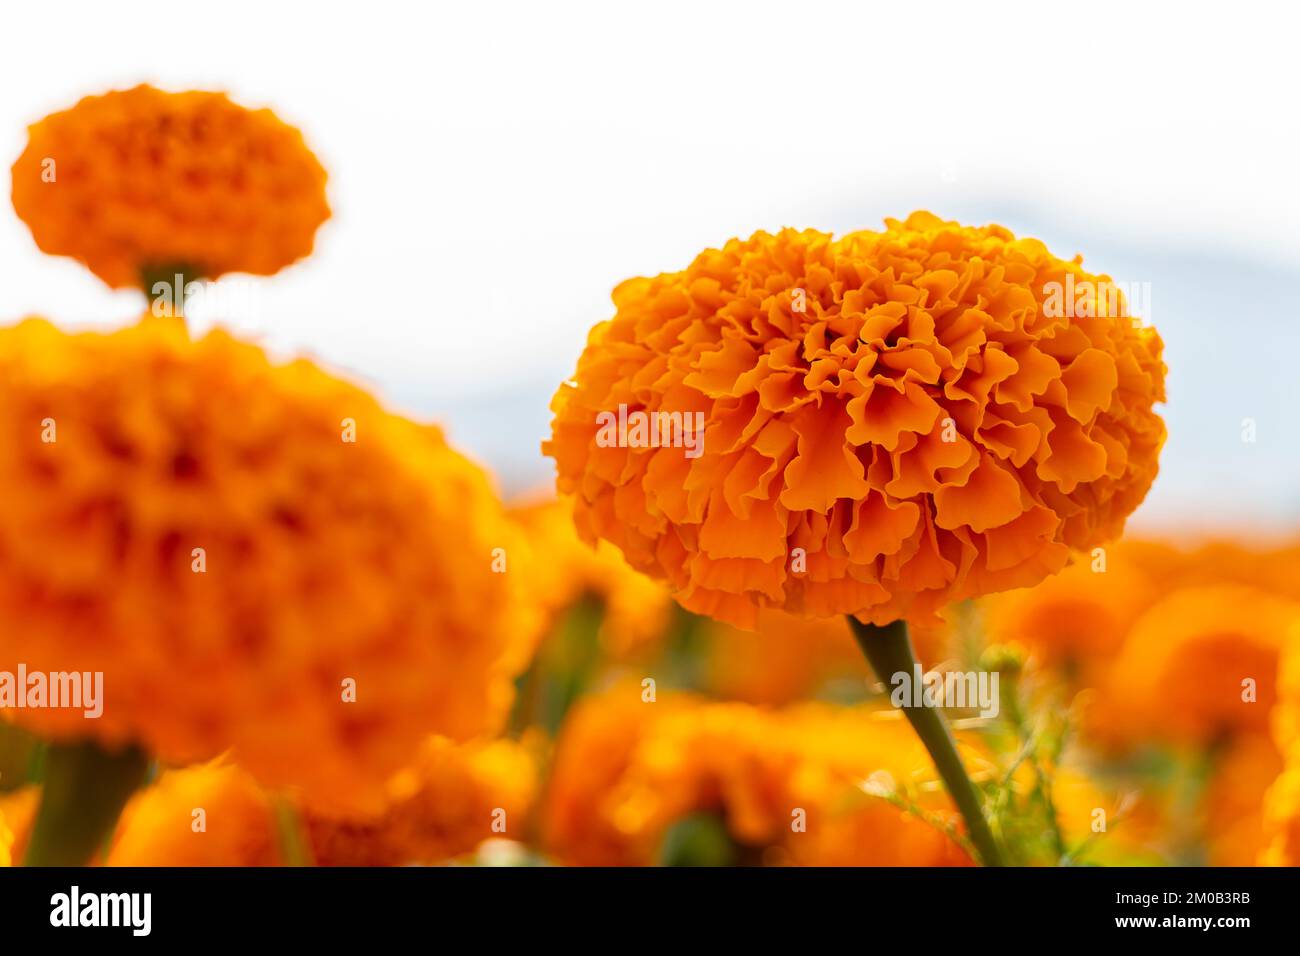 hands of Mexican farmer growing cempasuchil tagete flowers mexico latin america Stock Photo